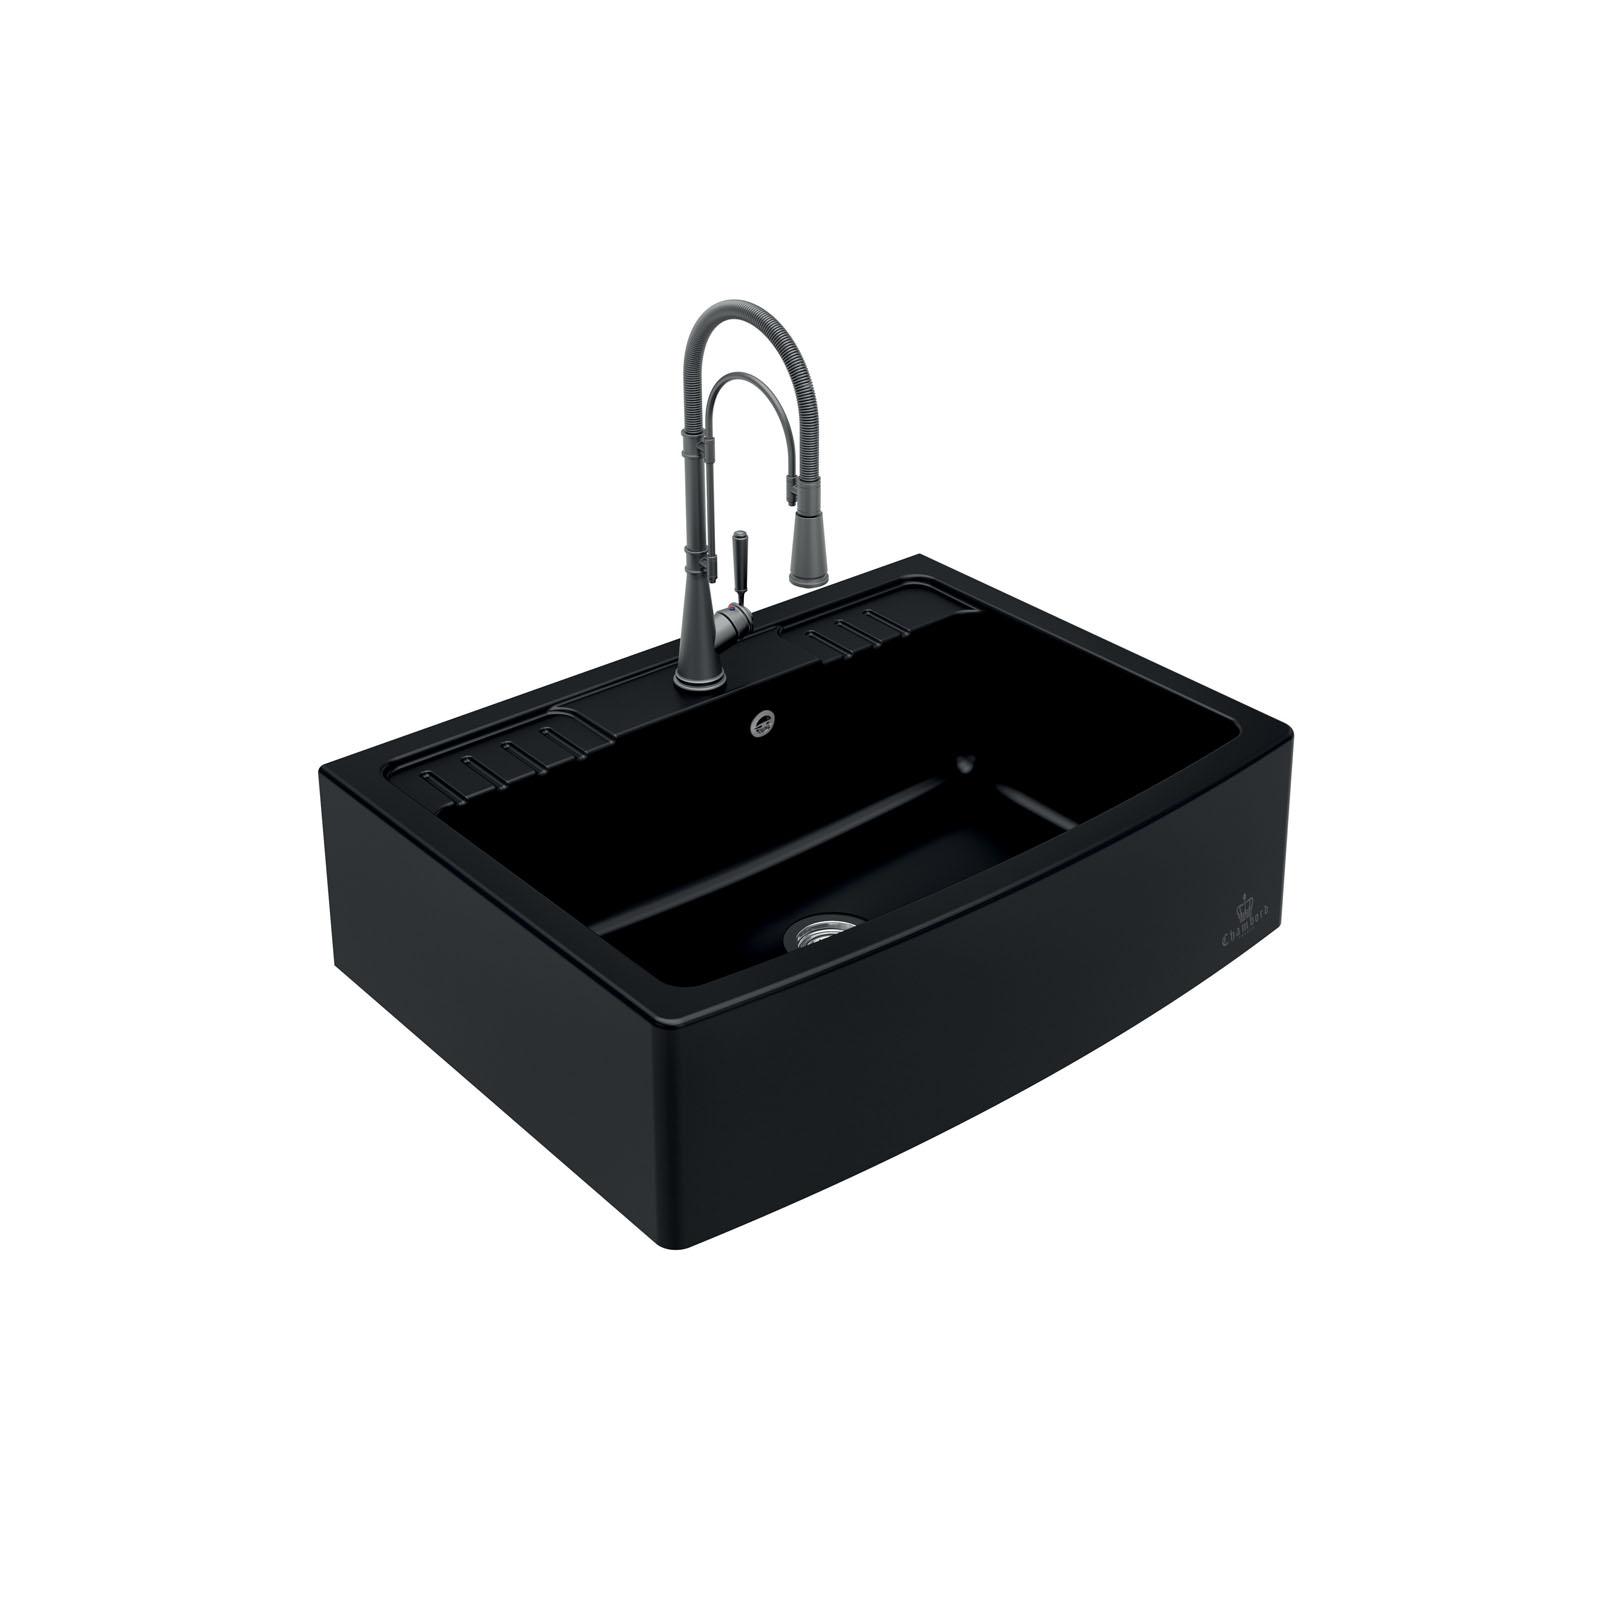 High-quality sink Clotaire IV granit black - one bowl 